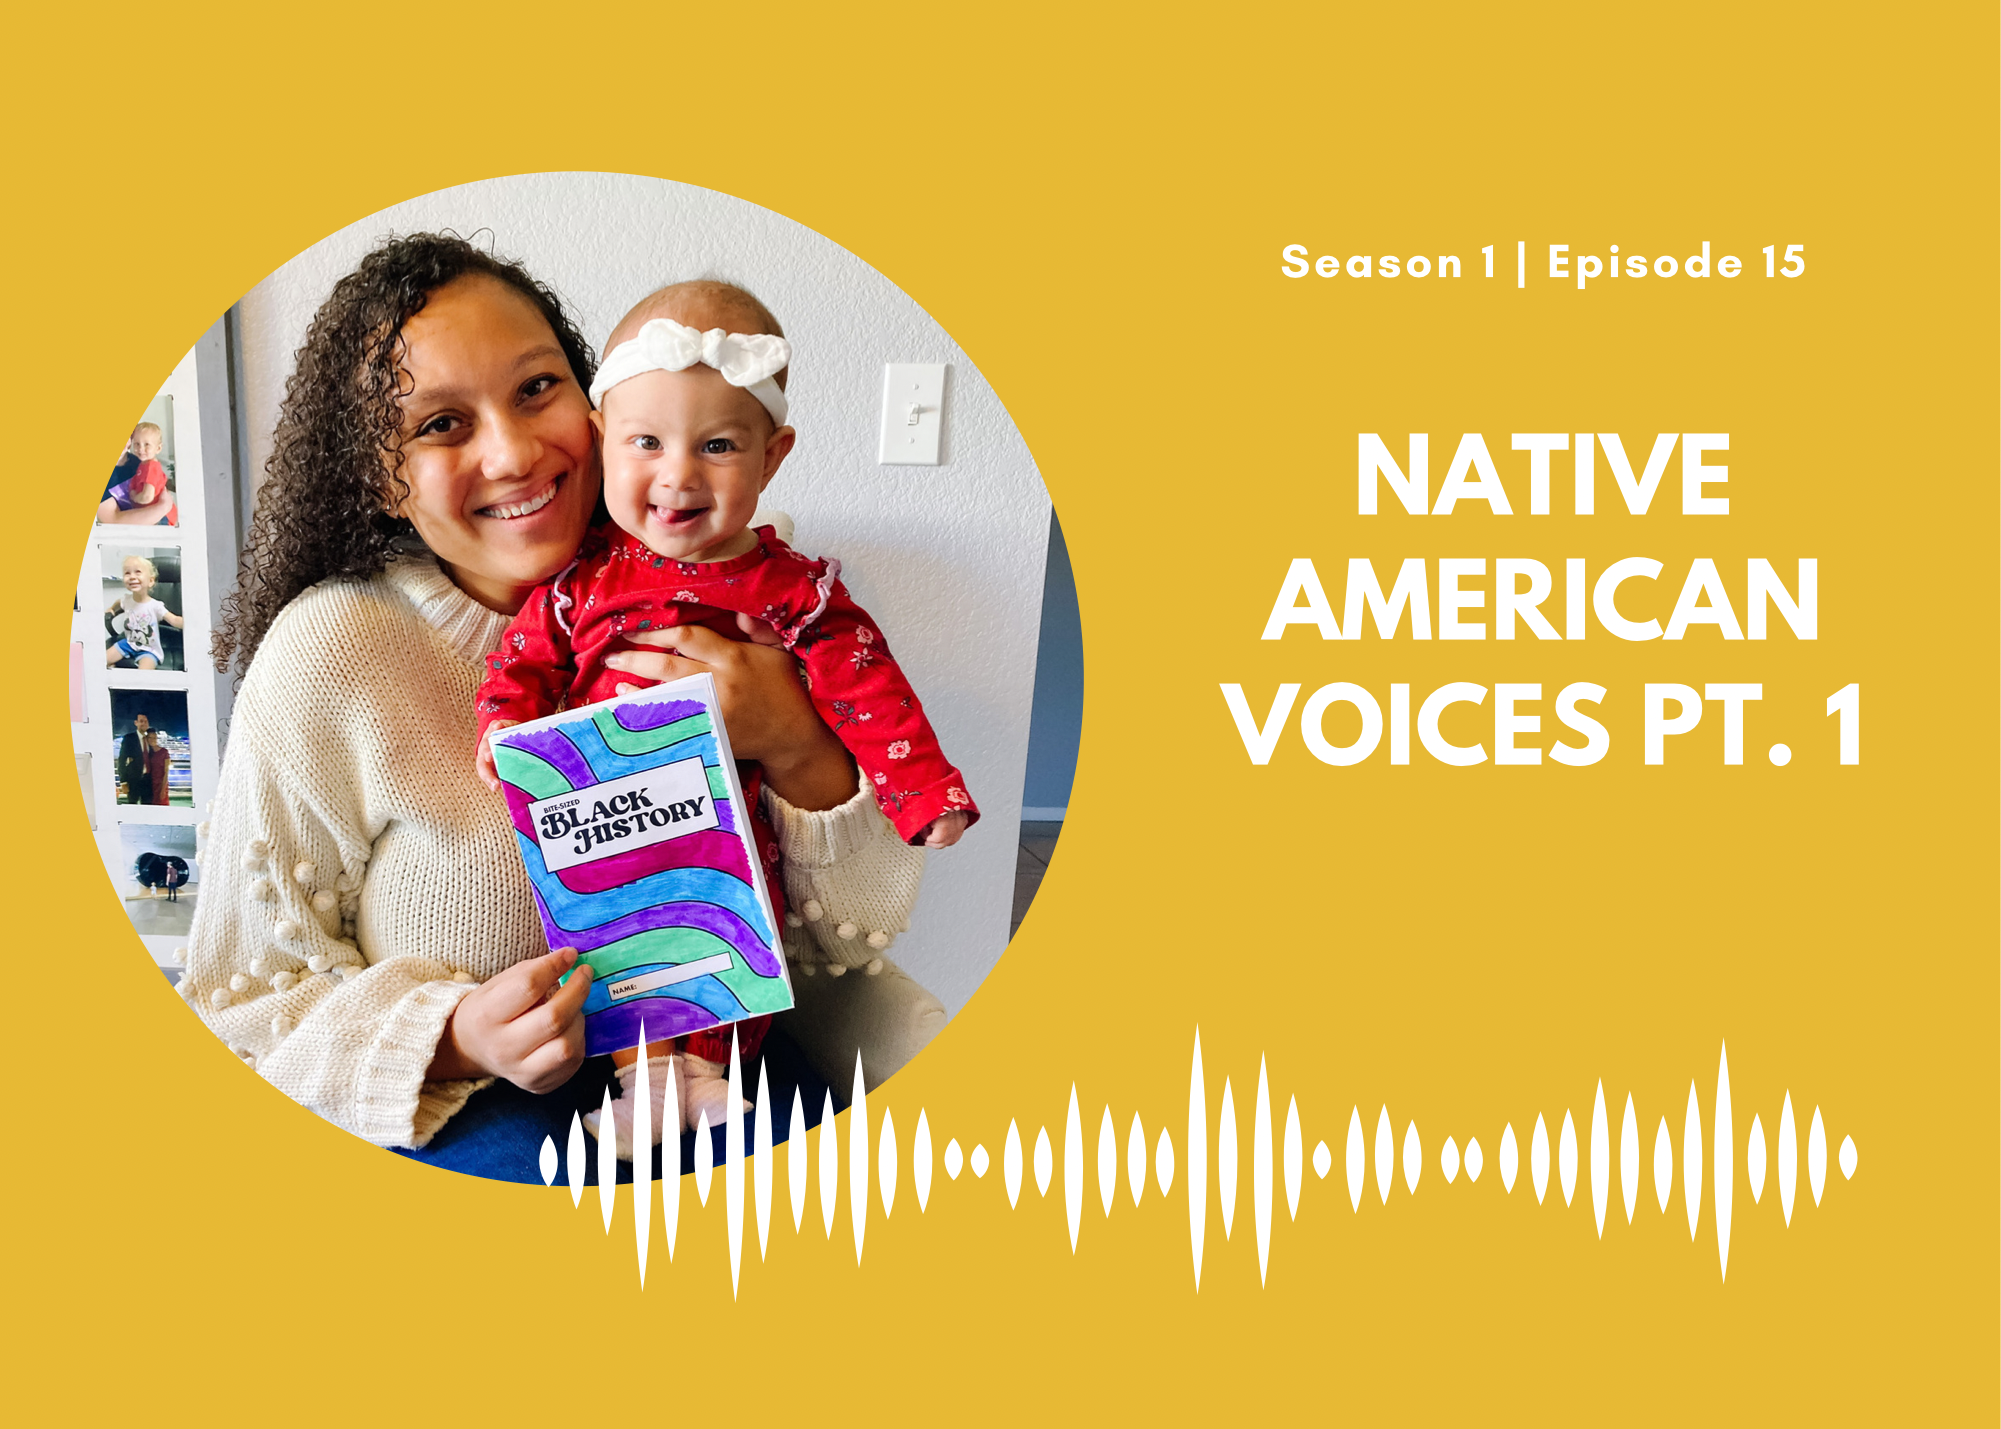 Native American Voices Pt. 1